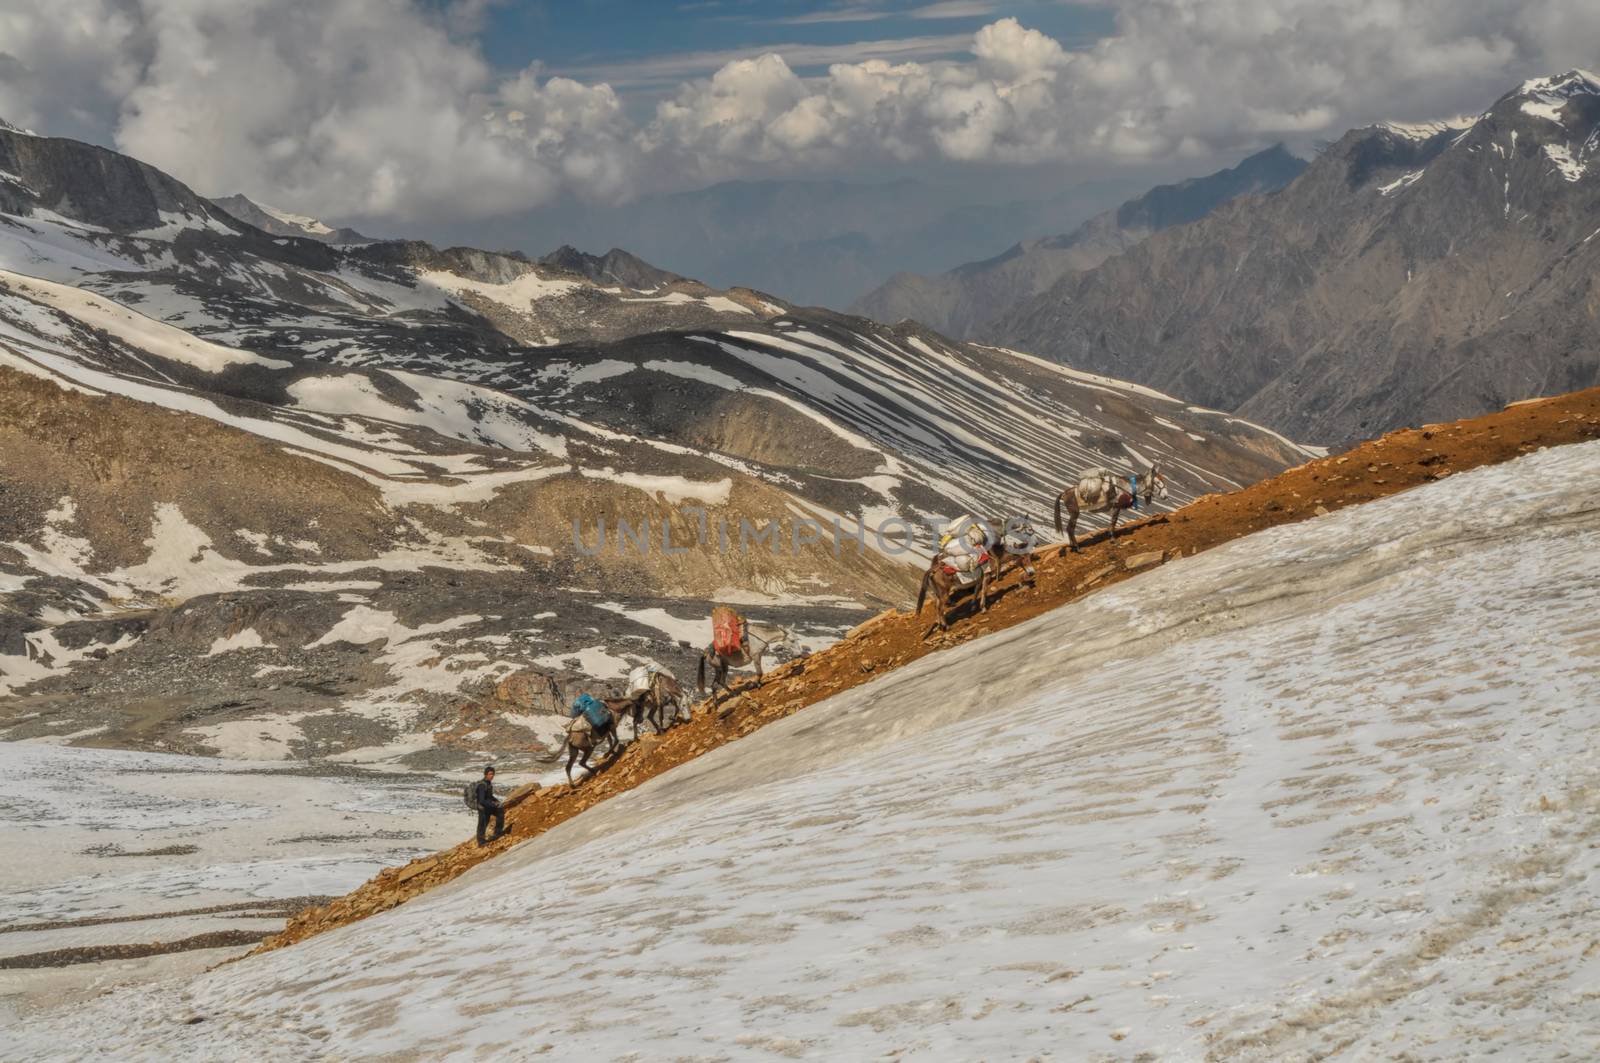 Caravan of mules in high altitudes of Himalayas mountains in Nepal